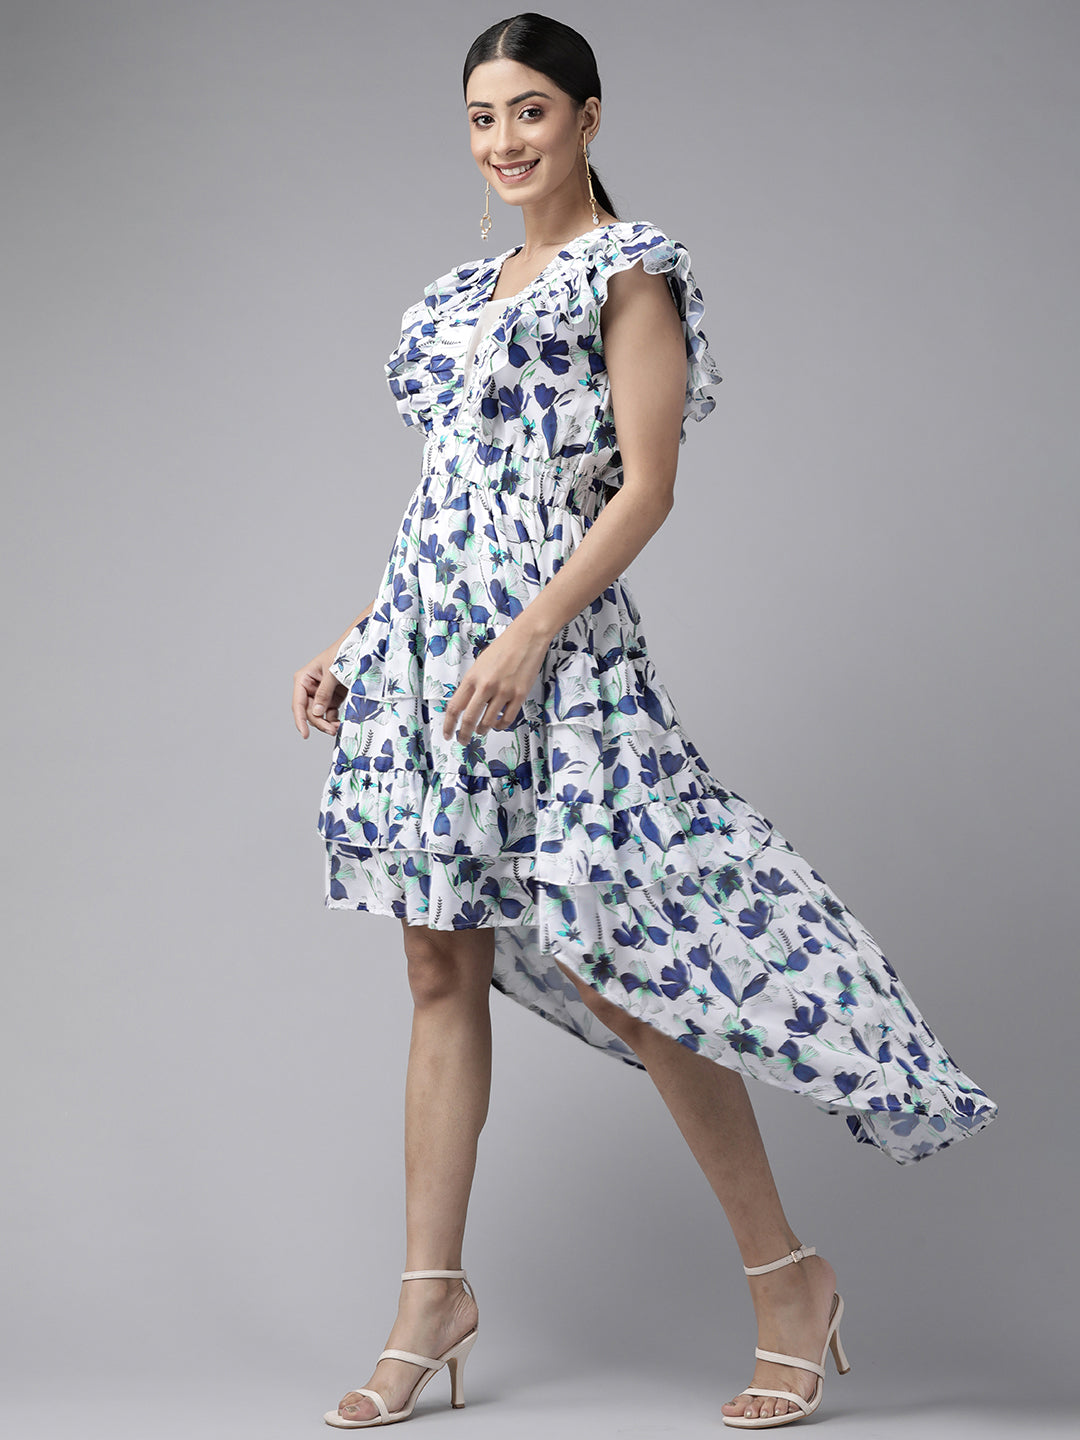 PANIT White  Navy Blue Floral Printed Ruffled Layered A-Line Midi Dress